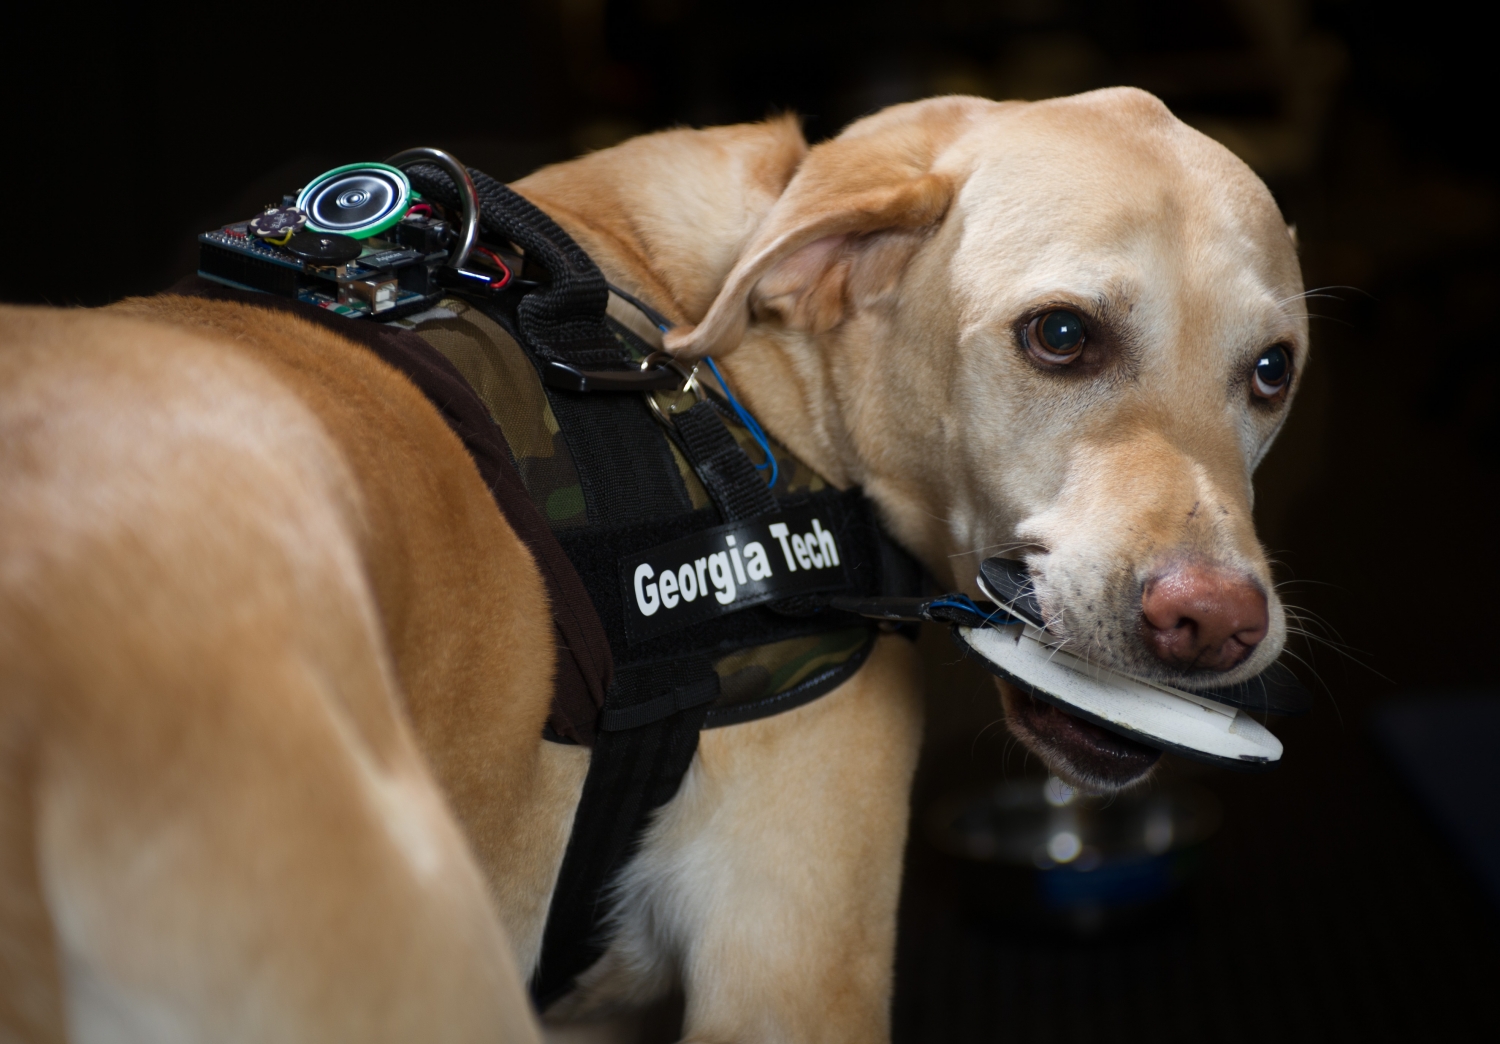 The FIDO vest for canines is equipped with several sensors. A dog can trigger a sensor by nipping or nudging it, movement that send audible cues to the dog’s owner